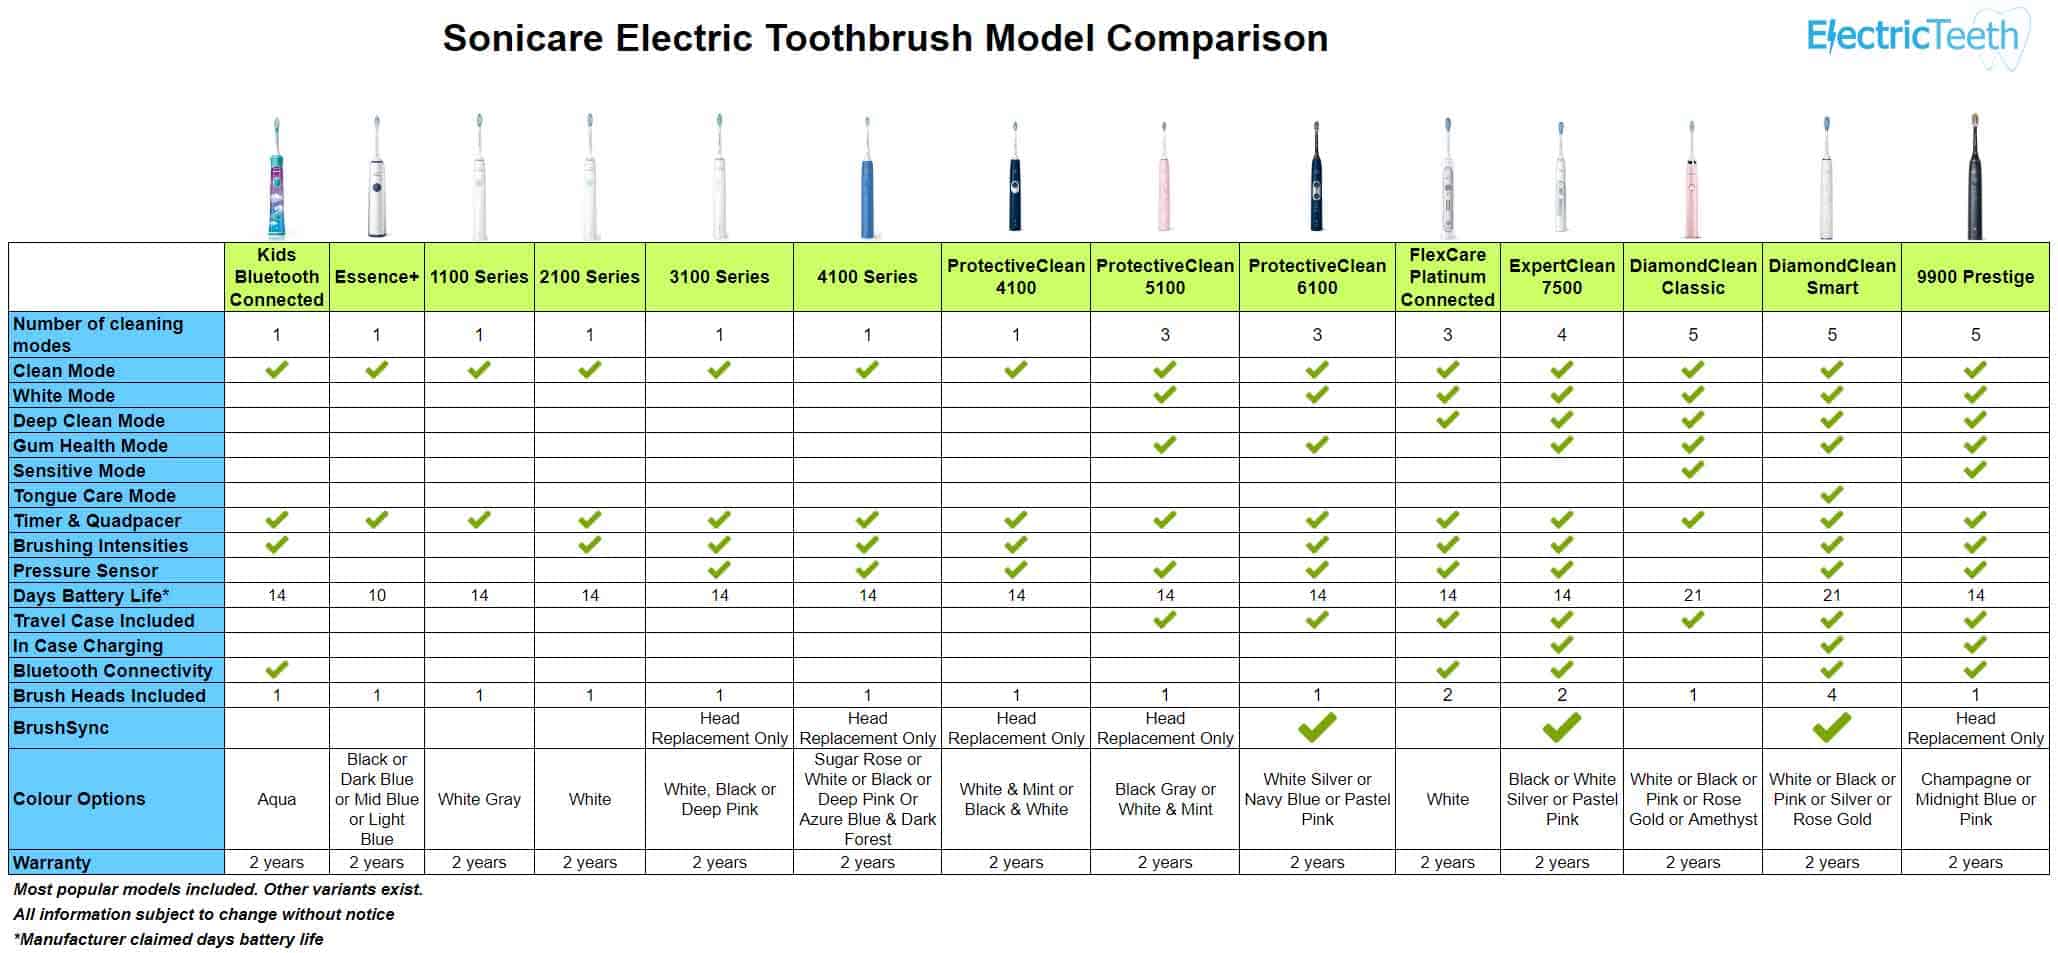 Sonicare Electric Toothbrush Comparisons 2